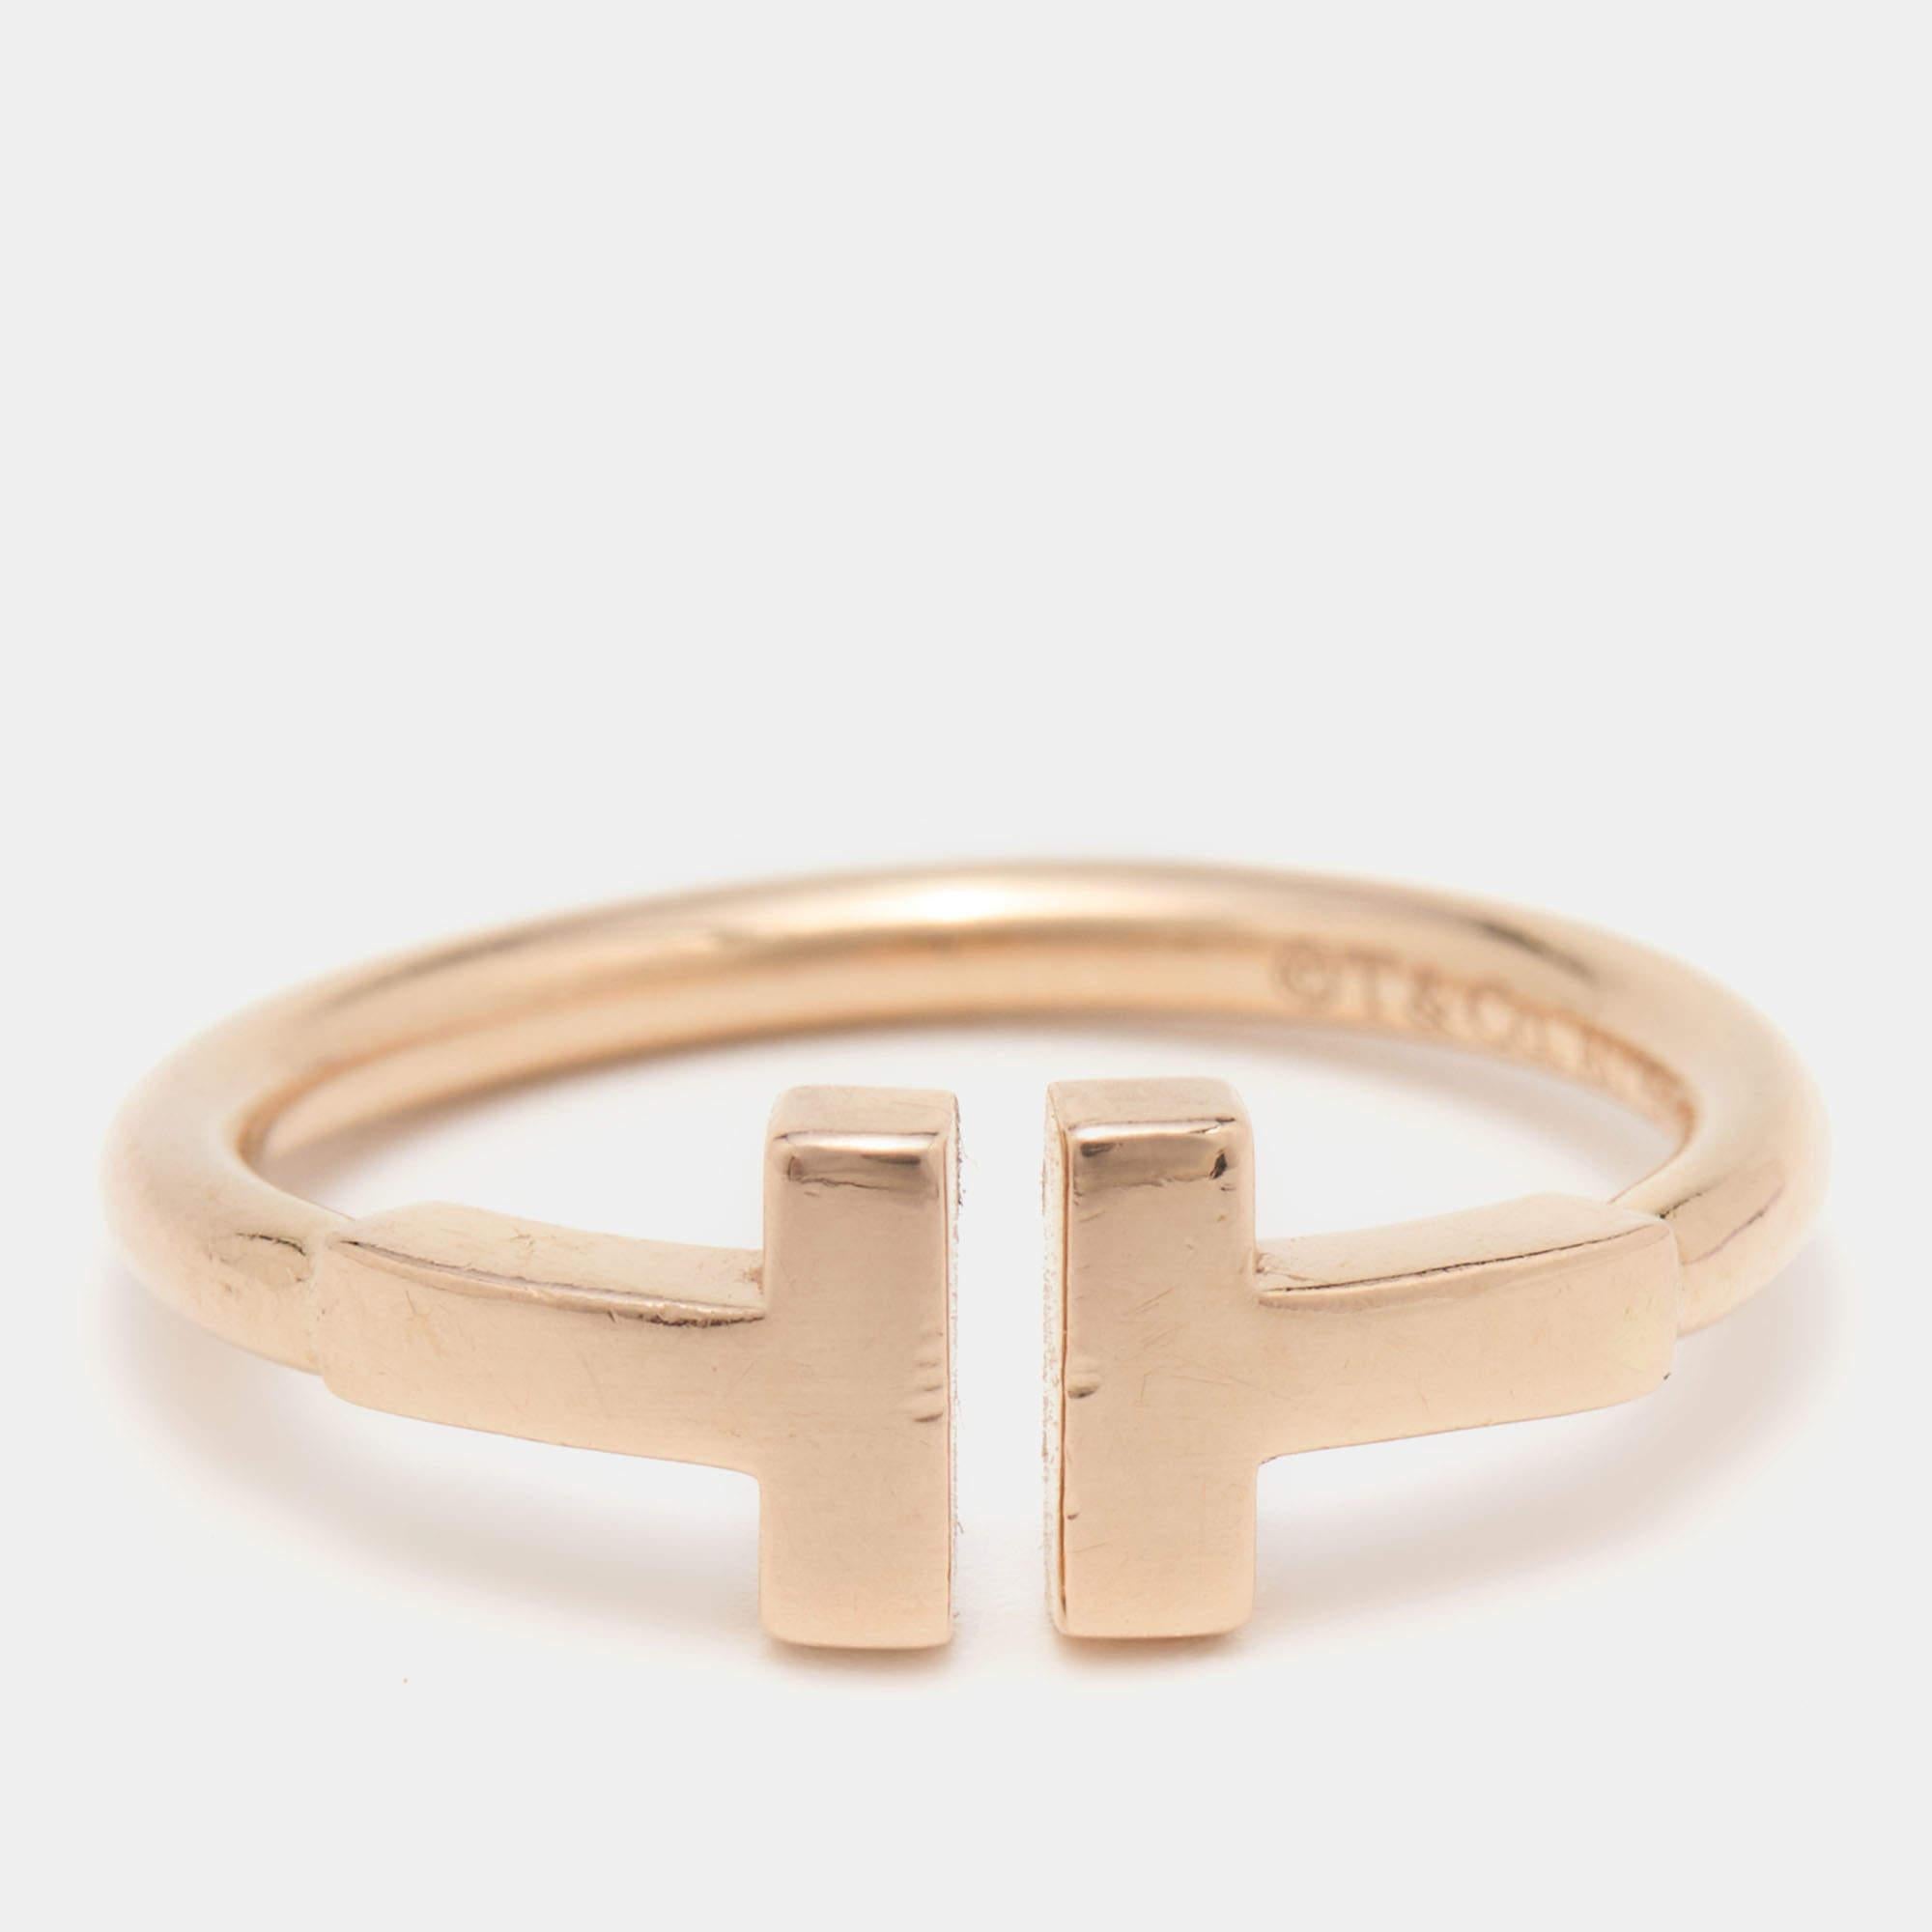 Luxury and fine skill take the front stage with this beautiful ring from Tiffany & Co. Carved using 18k rose-gold metal, this intricate T-Wire creation embodies a desirable visual display. This sleek accessory makes the perfect addition to your